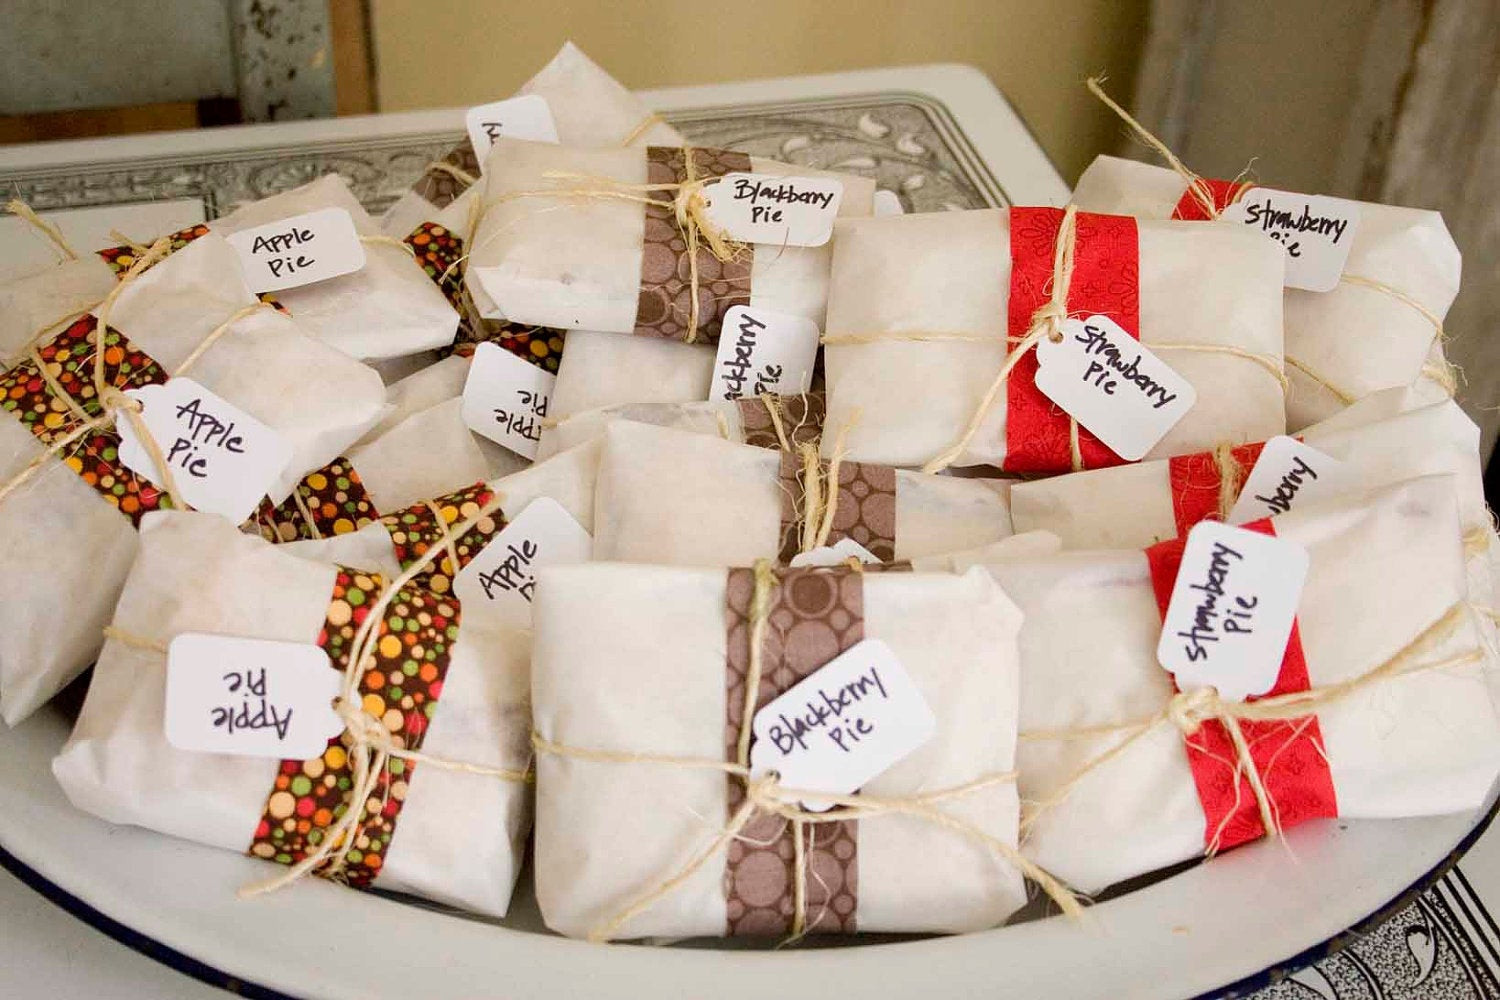 Wedding Gifts For Bridal Party
 Wedding Favors Homemade Personal Pies 30 count